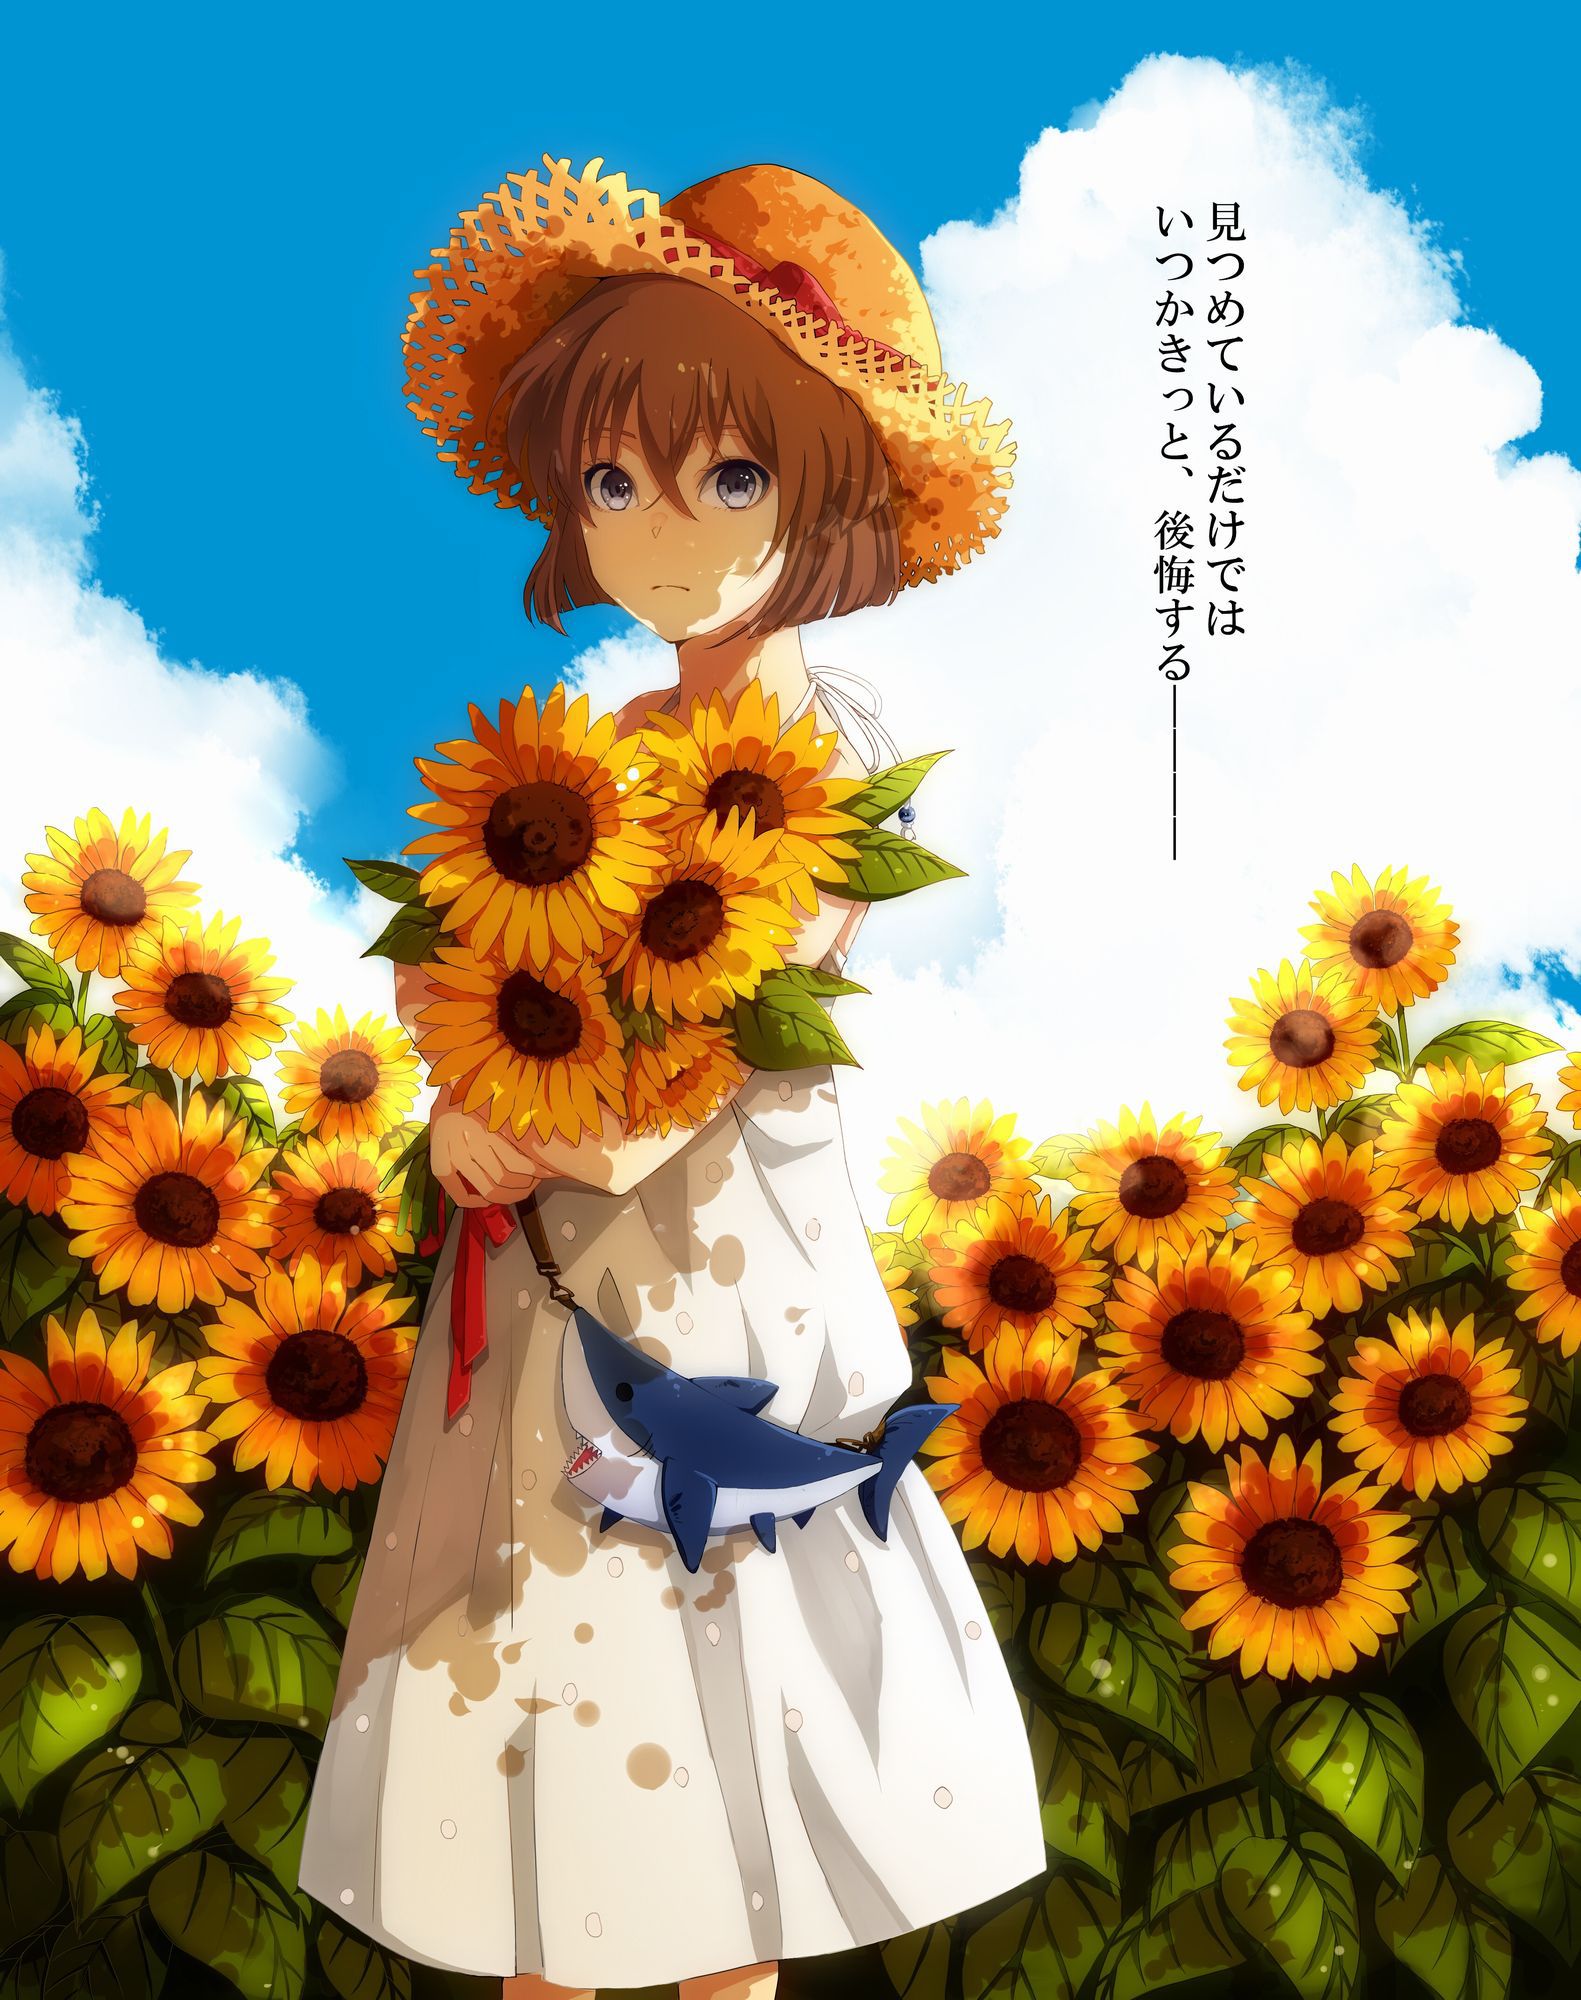 [Secondary, ZIP] summer 2: girl with a sunflower or image summary 27